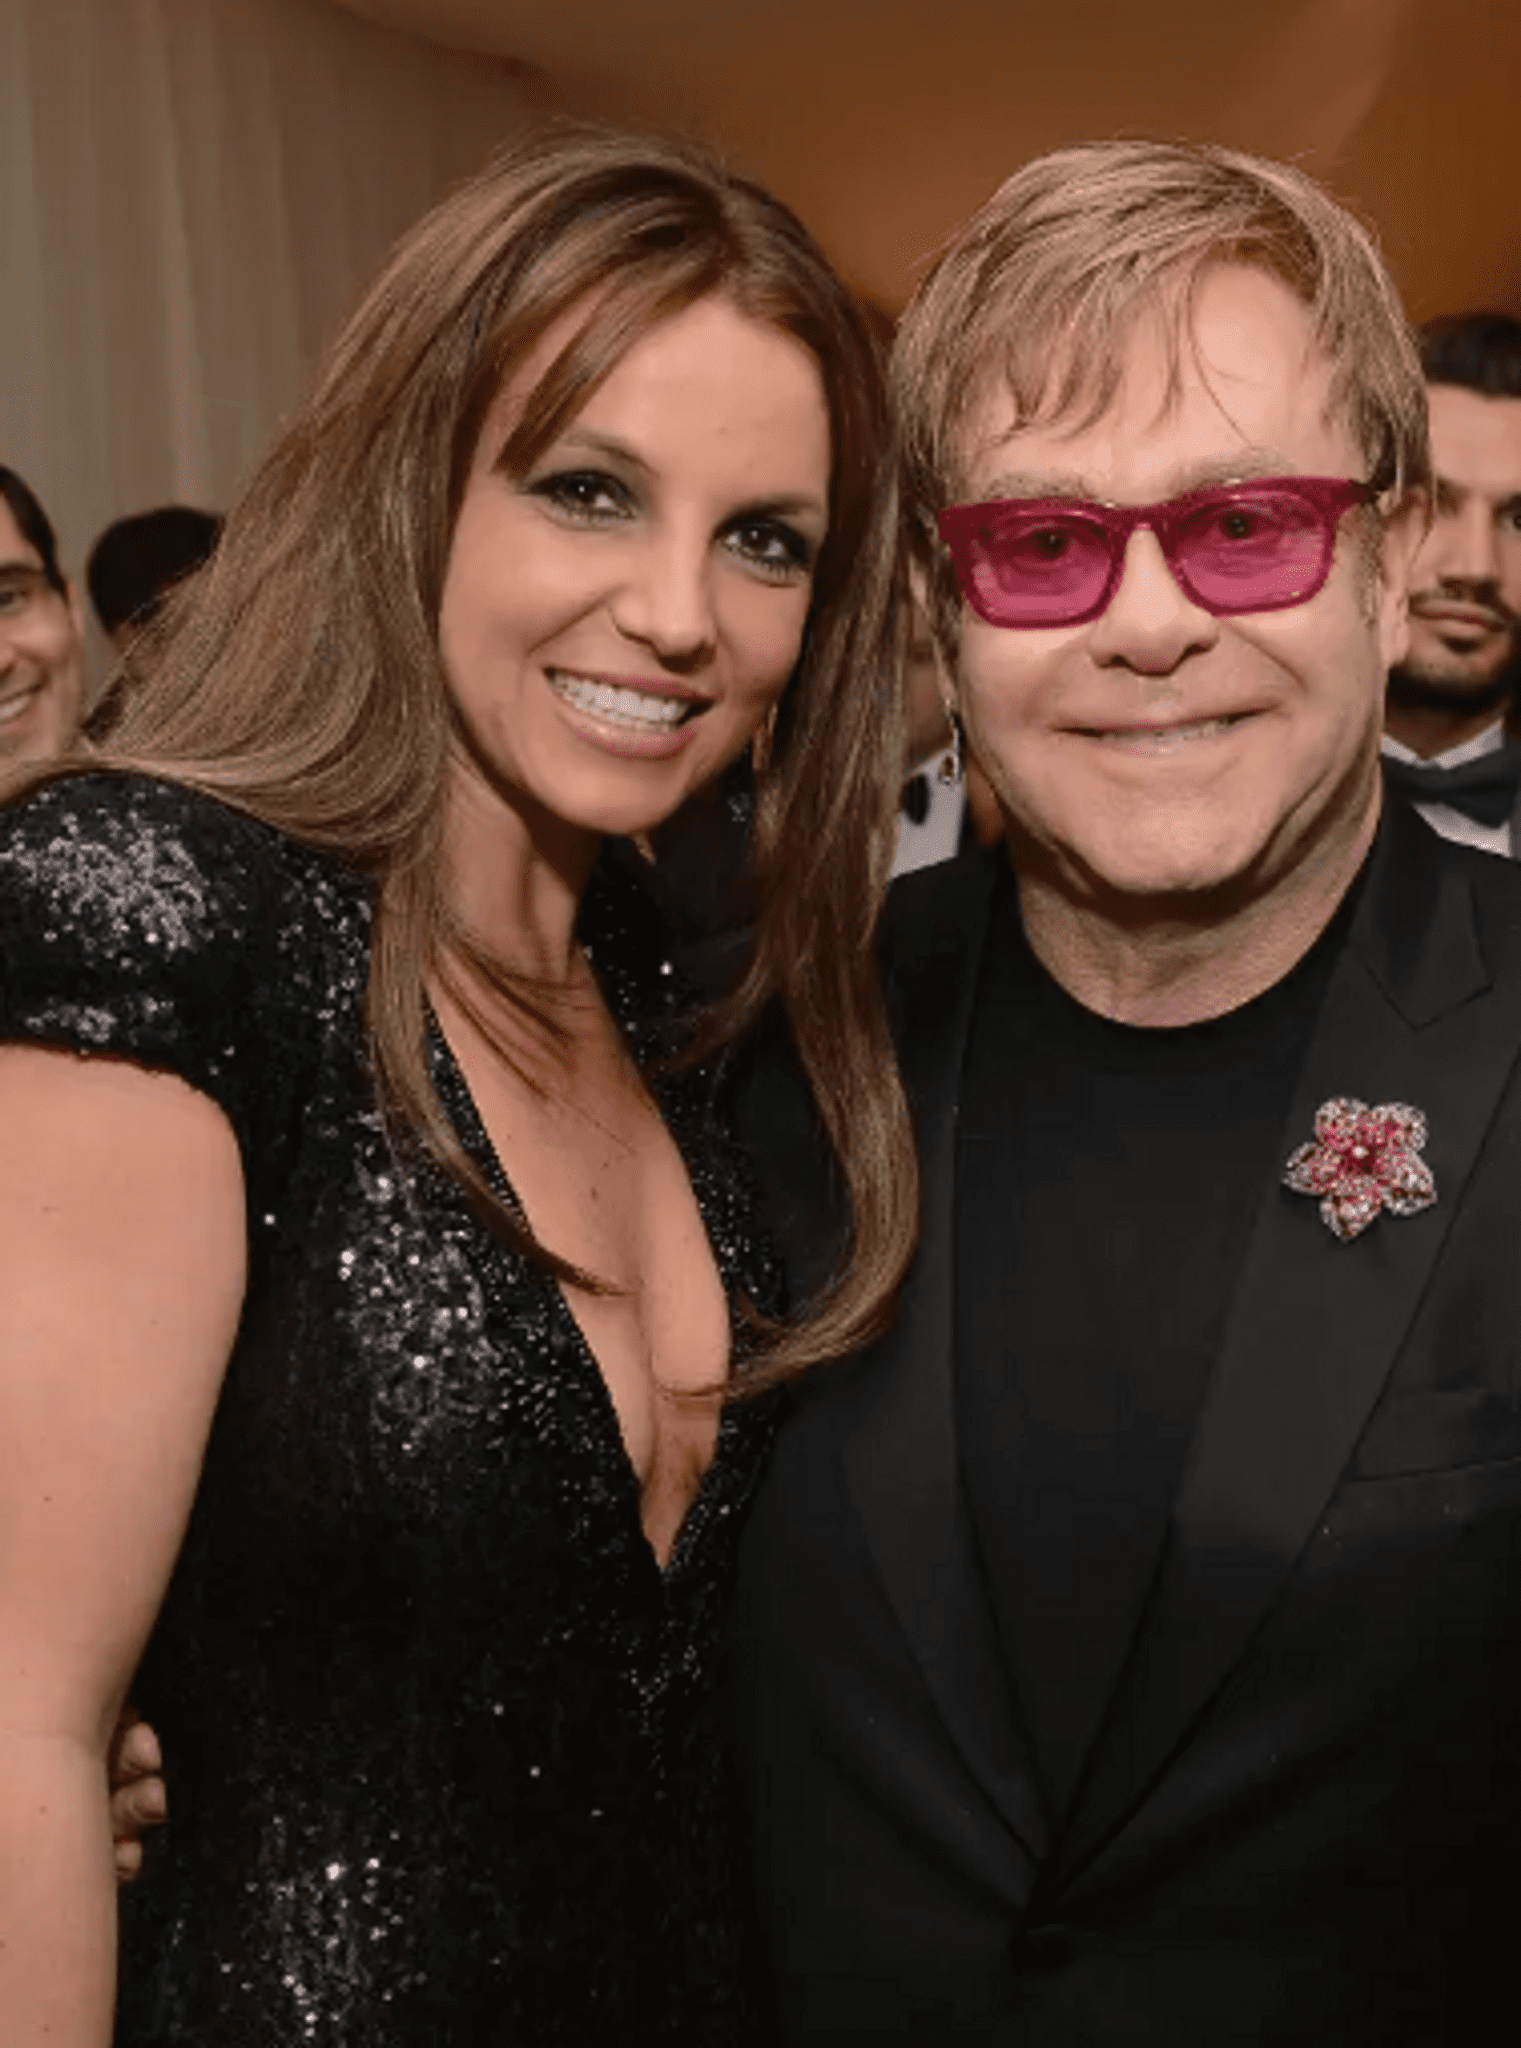 Hold Me Closer, A Duet By Britney Spears And Elton John Has Been Made Available